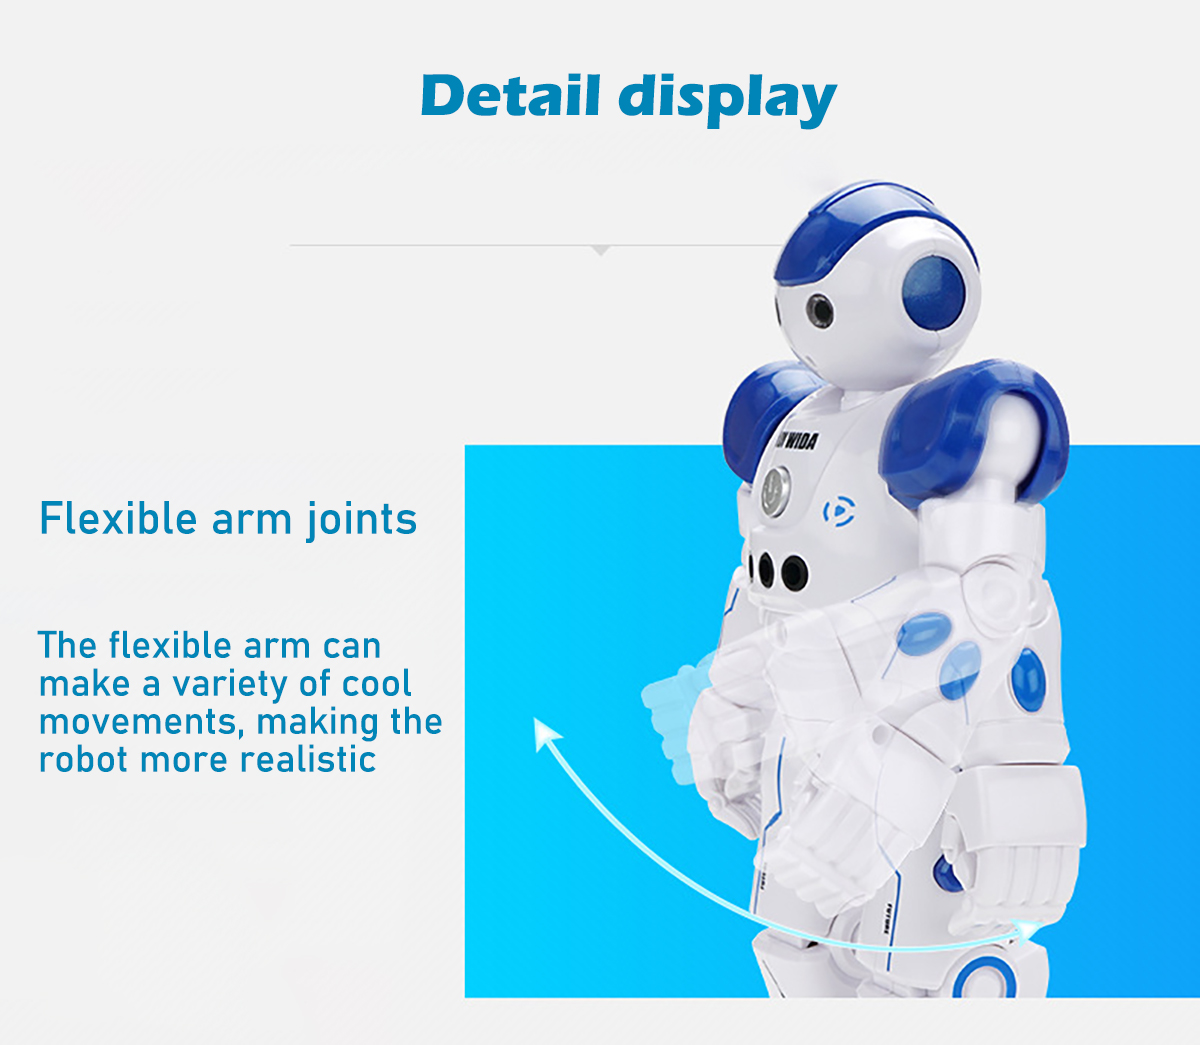 JJRC-R2S-Remote-Control-Programming-Gesture-Induction-Dancing-Robot-1887329-17